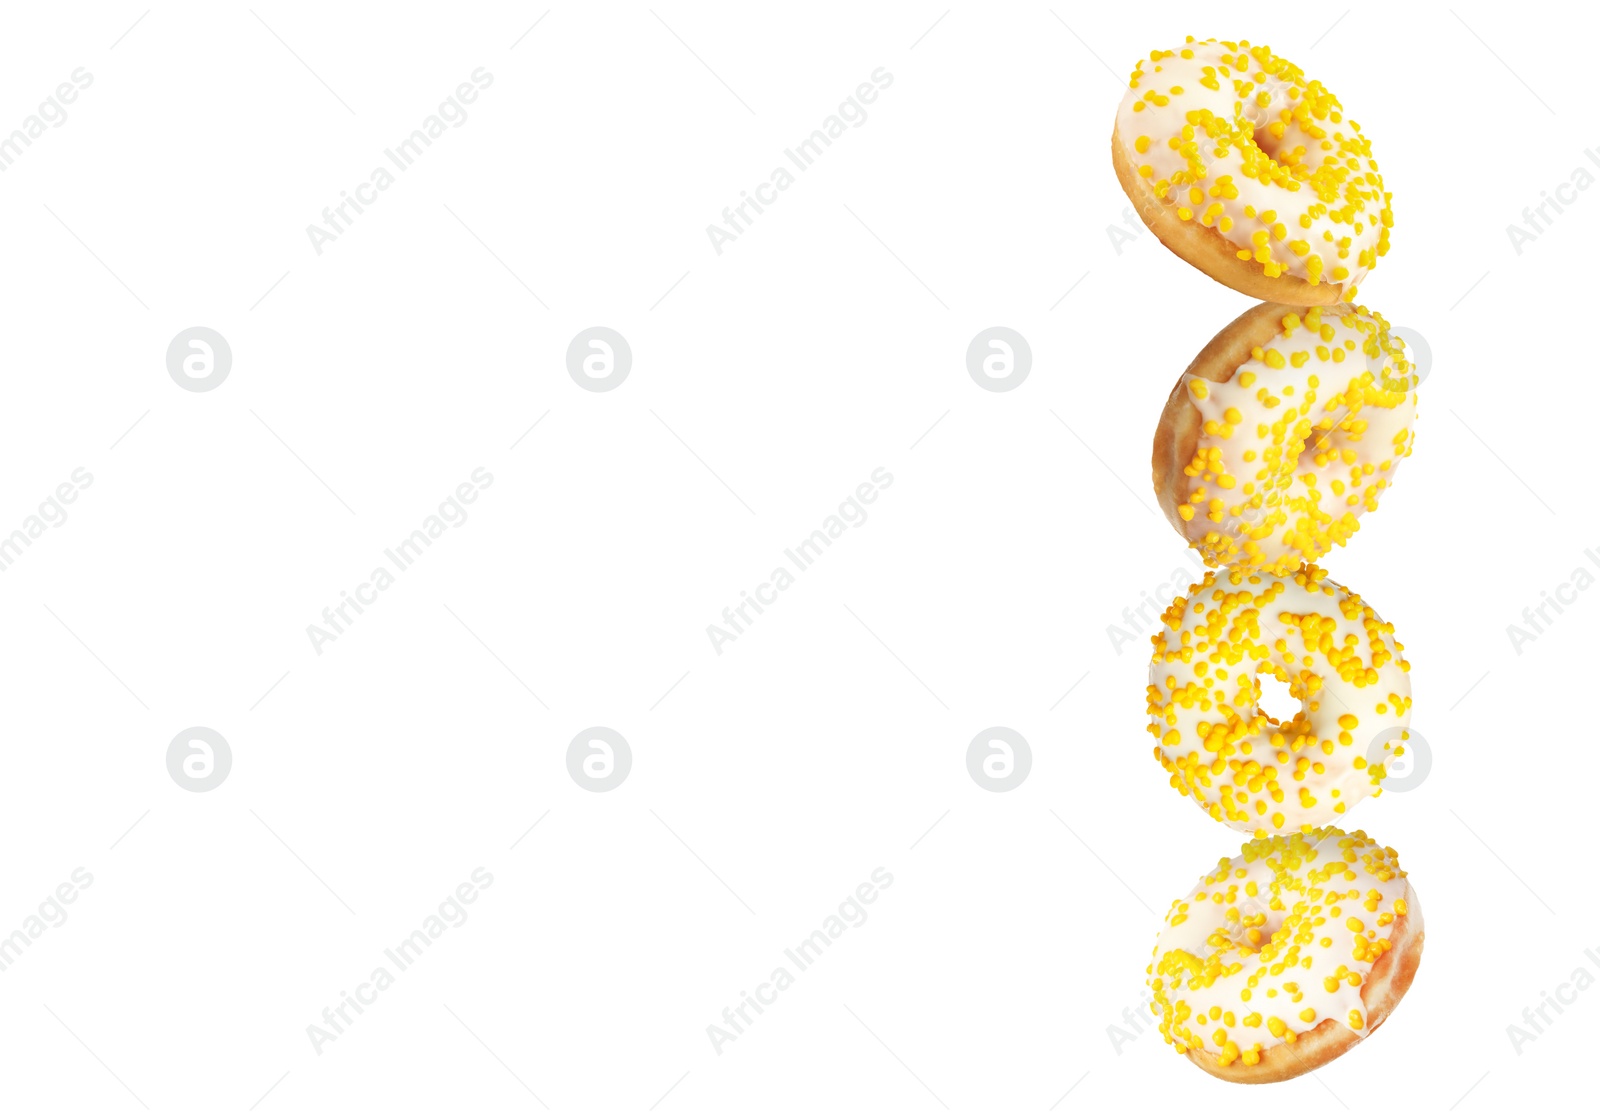 Image of Tasty donuts with sprinkles falling on white background